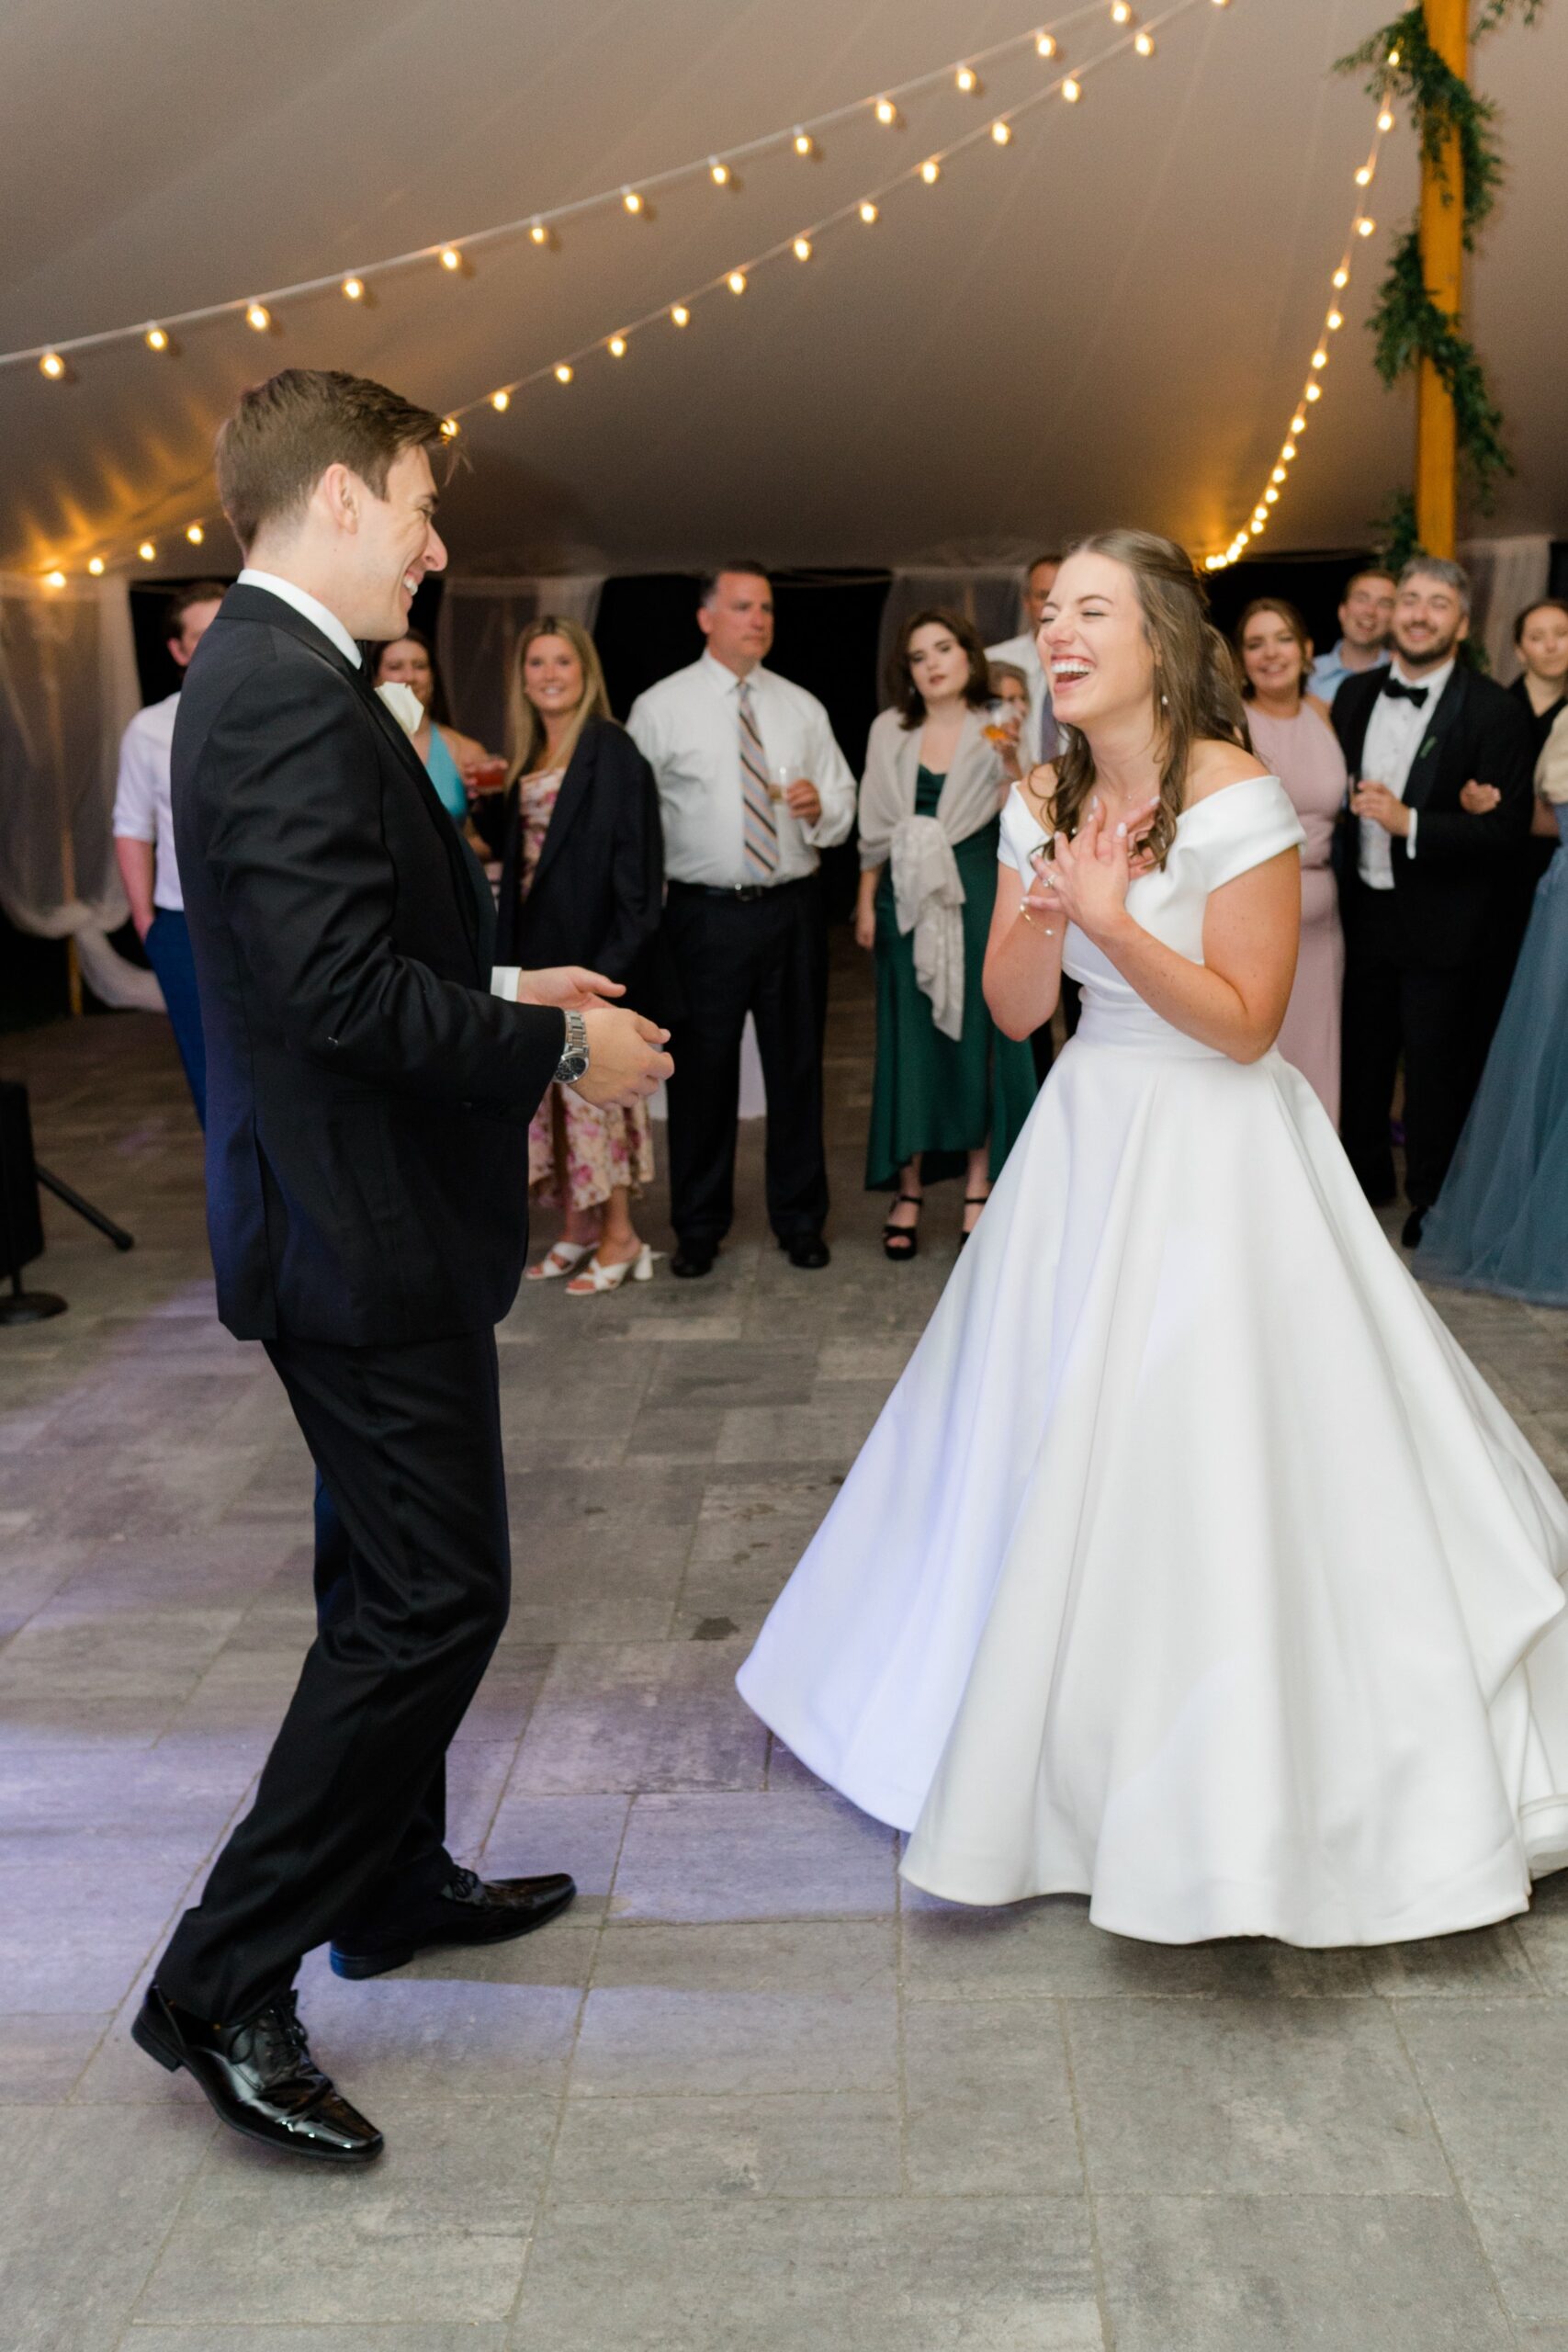 Elated bride has fun moment on the dance floor with her new husband. Boston wedding photographer.